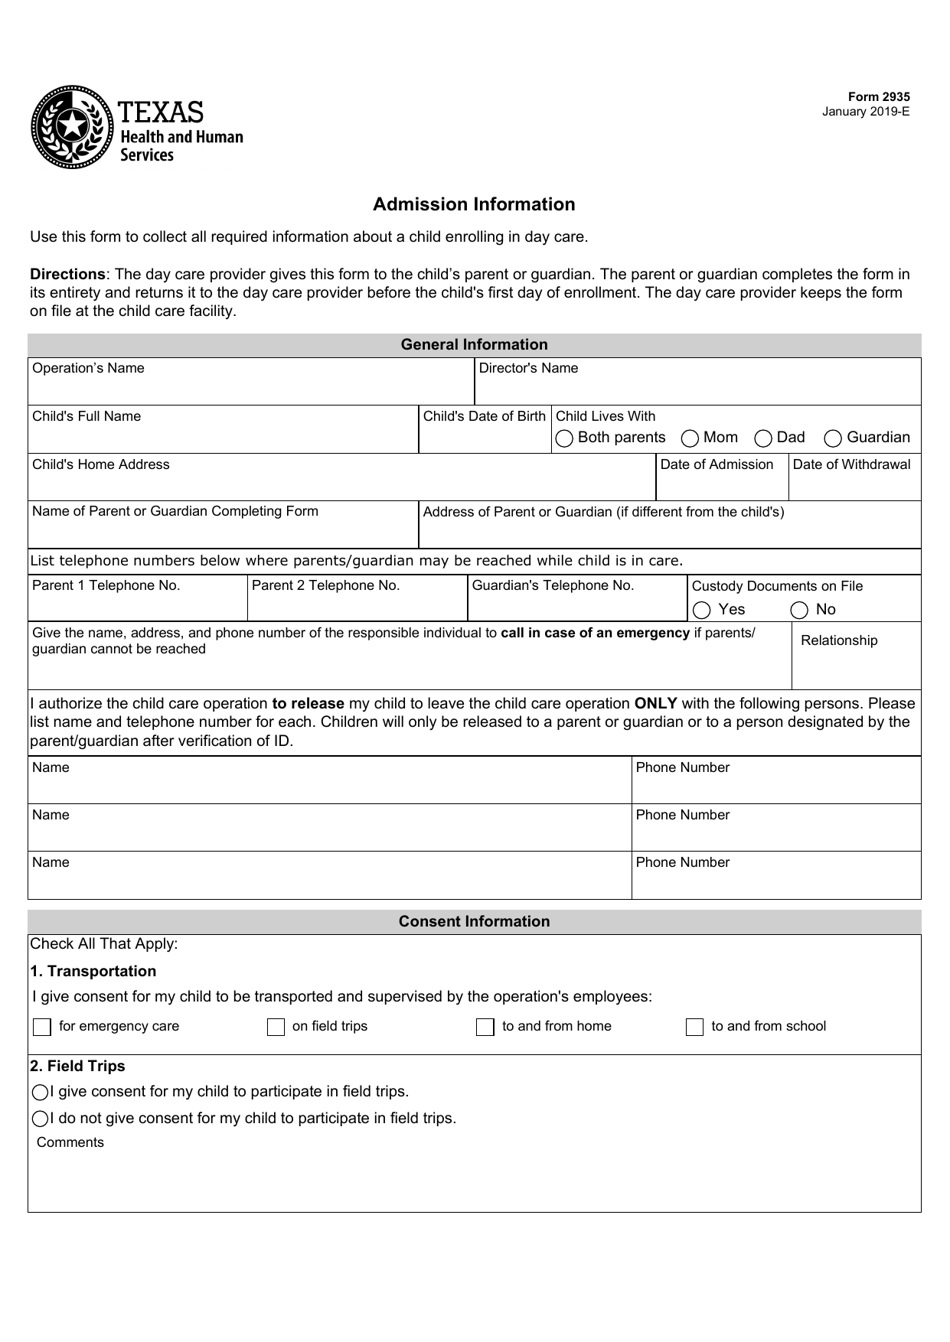 Form 2935 Admission Information - Texas, Page 1